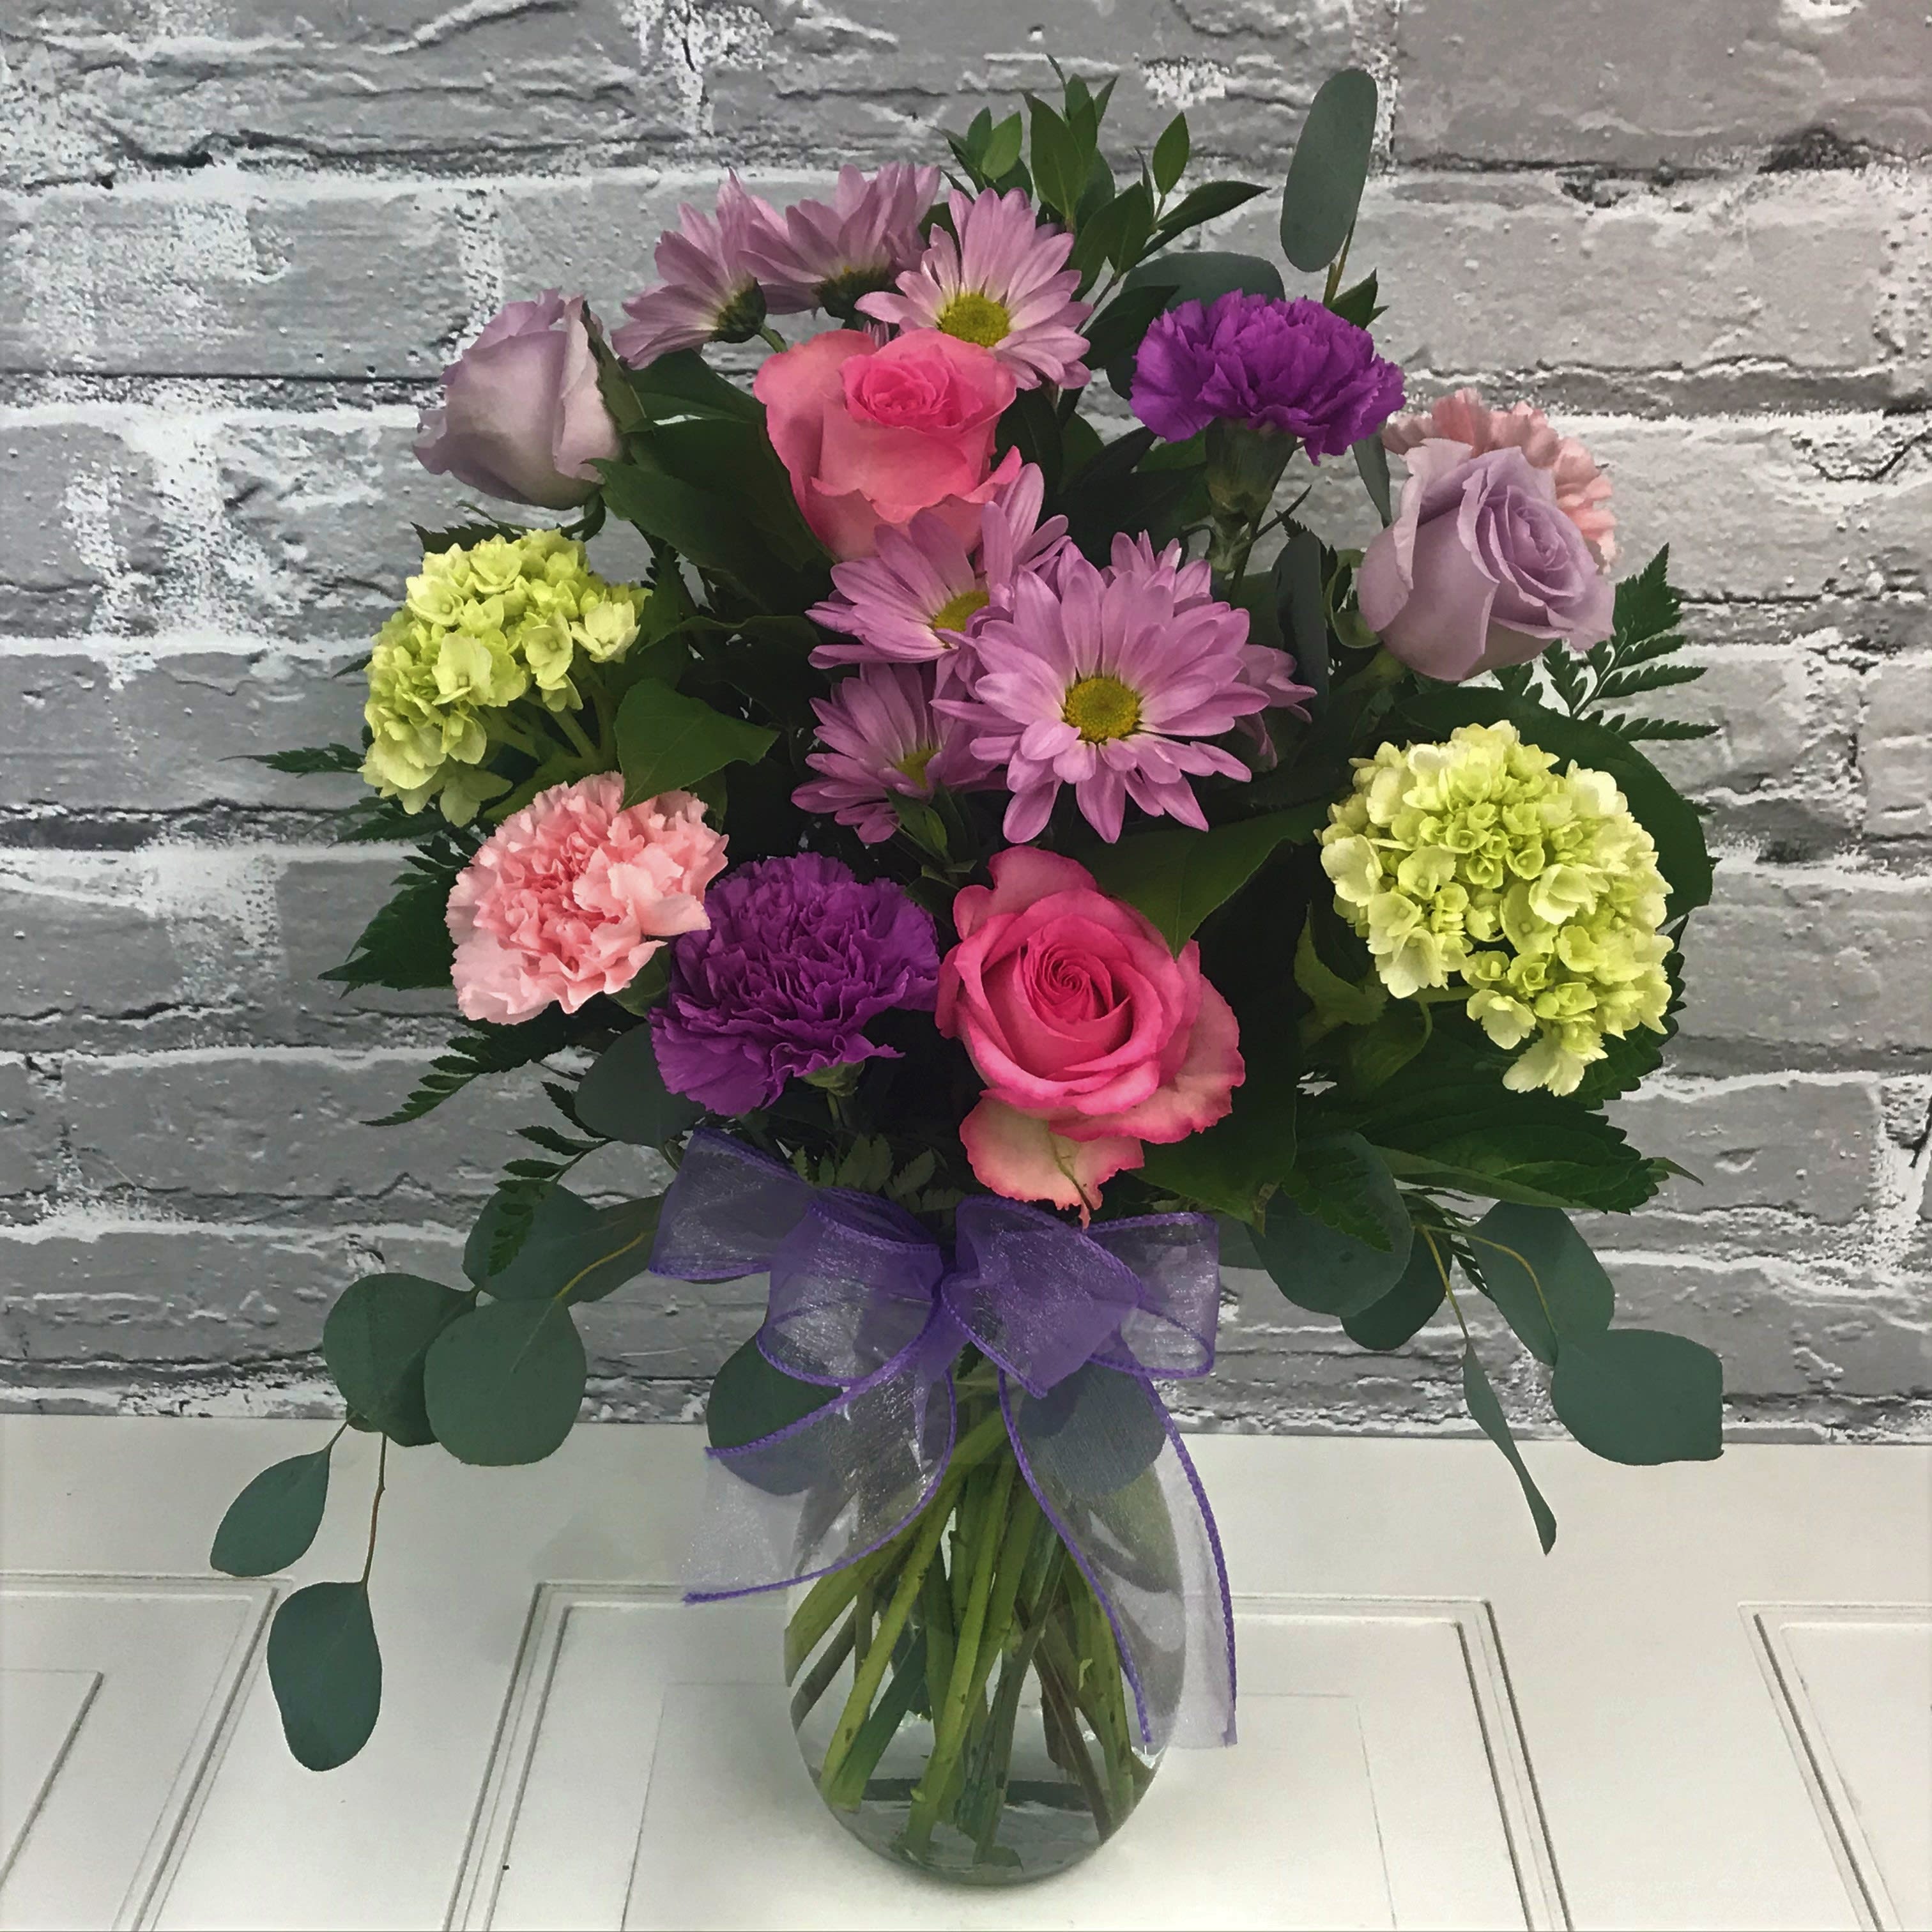 Moonlight - Lovely shades of lavender and pinks designed beautifully in a glass vase. Roses, Carnations, Daisies, Green Hydrangeas included. 